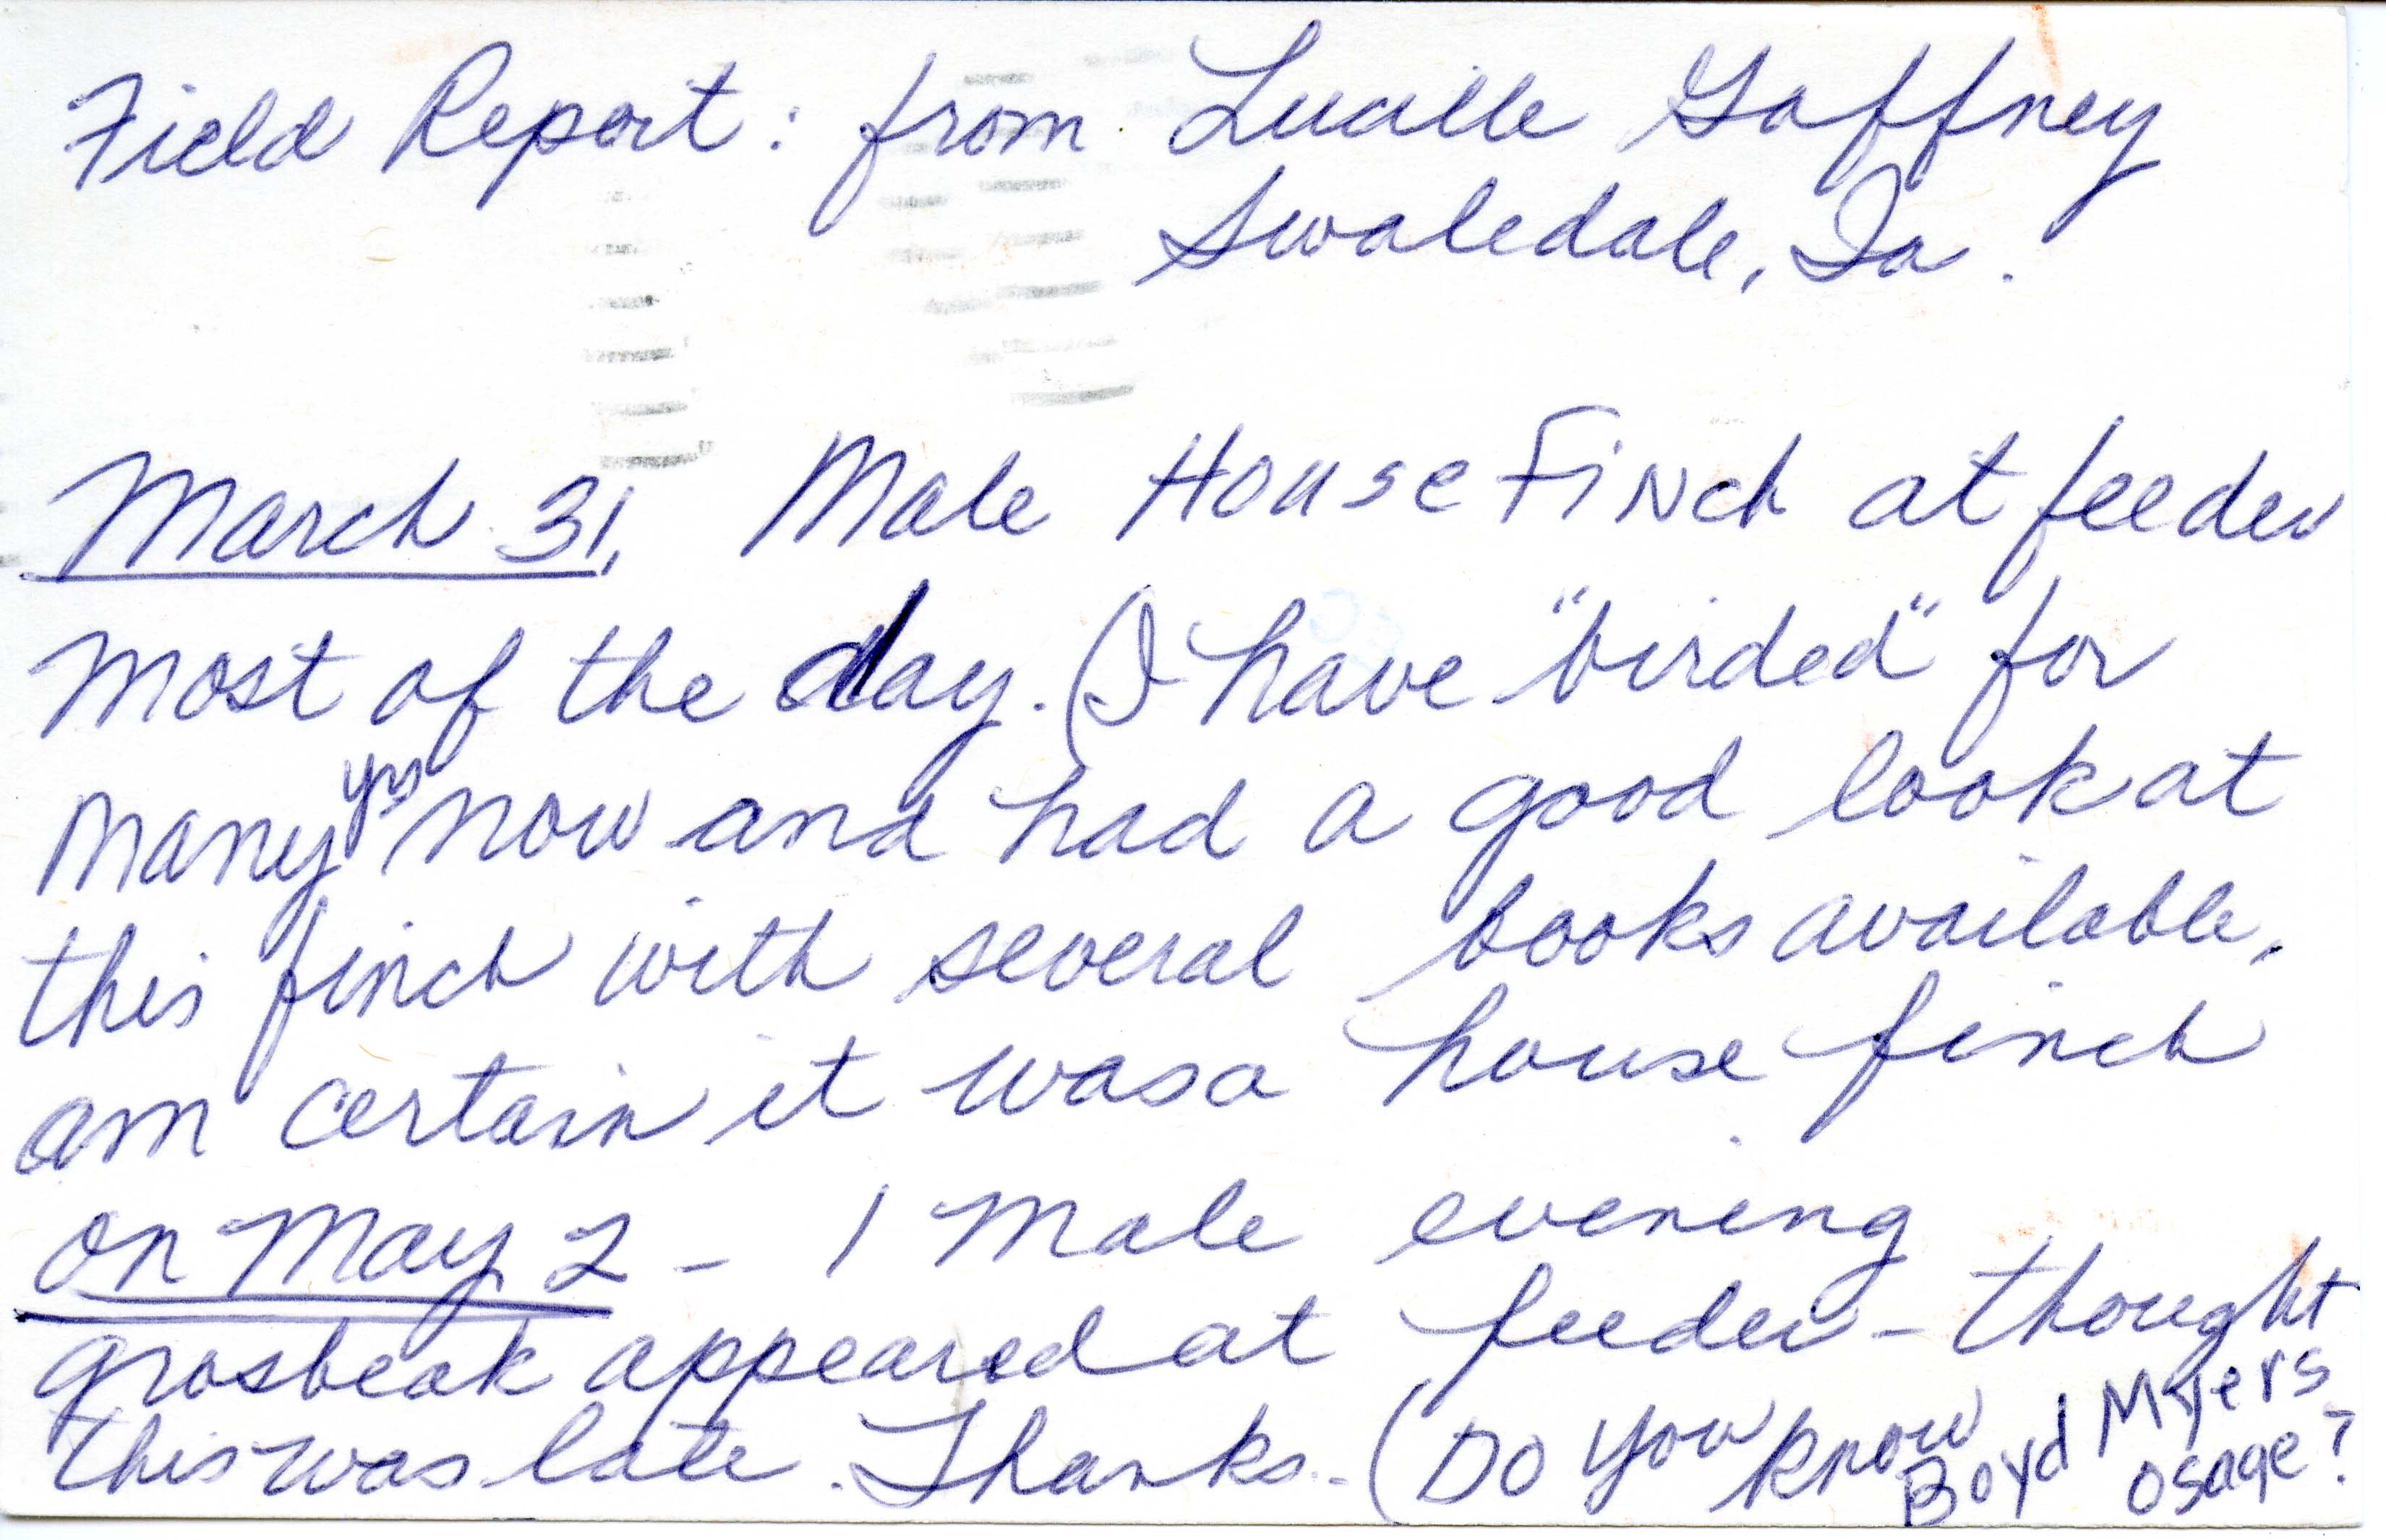 Field report from Lucille Gaffney, Spring 1986